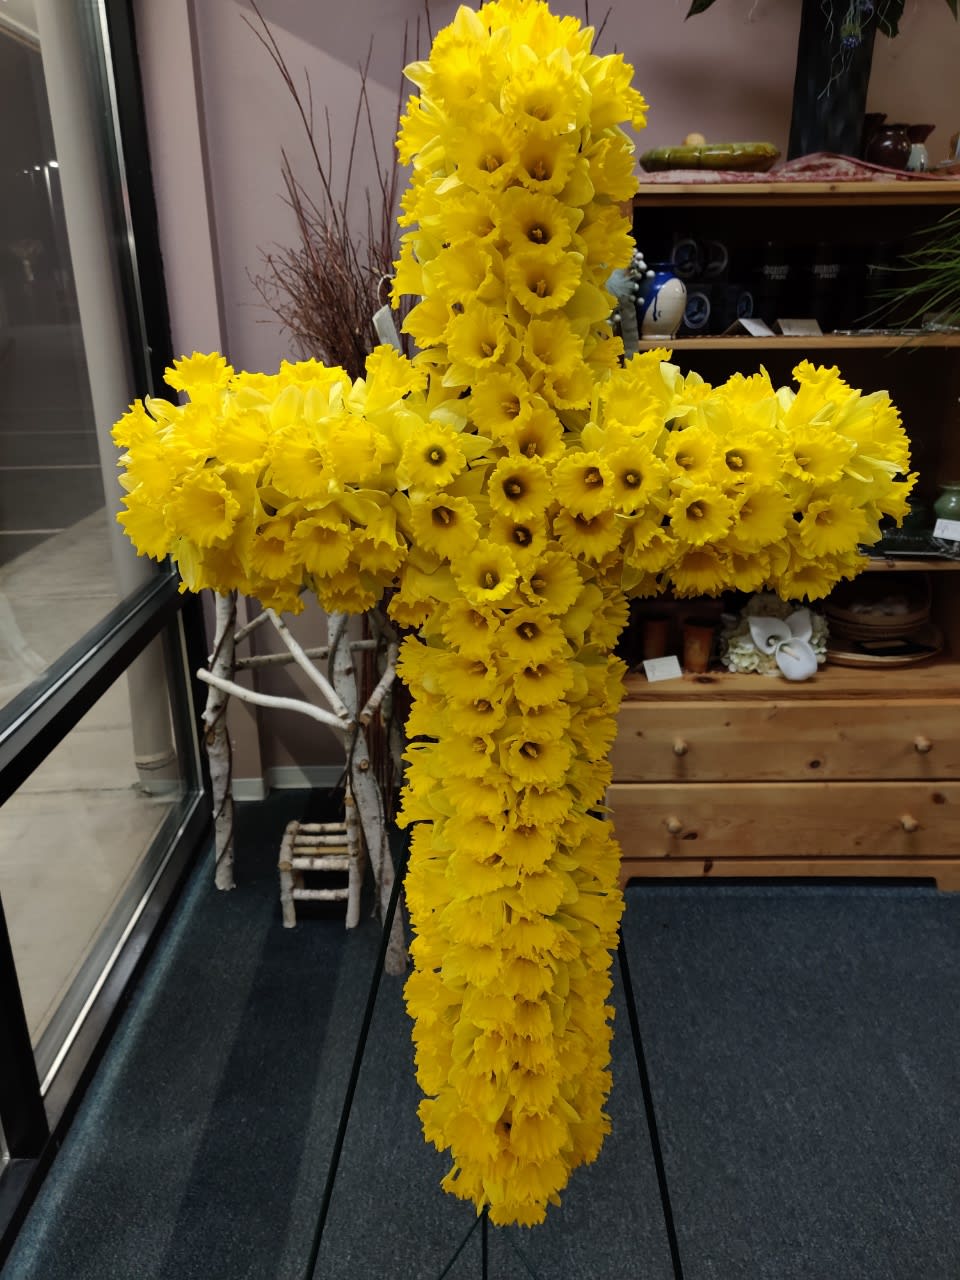 Cross ease consisting of Daffodils